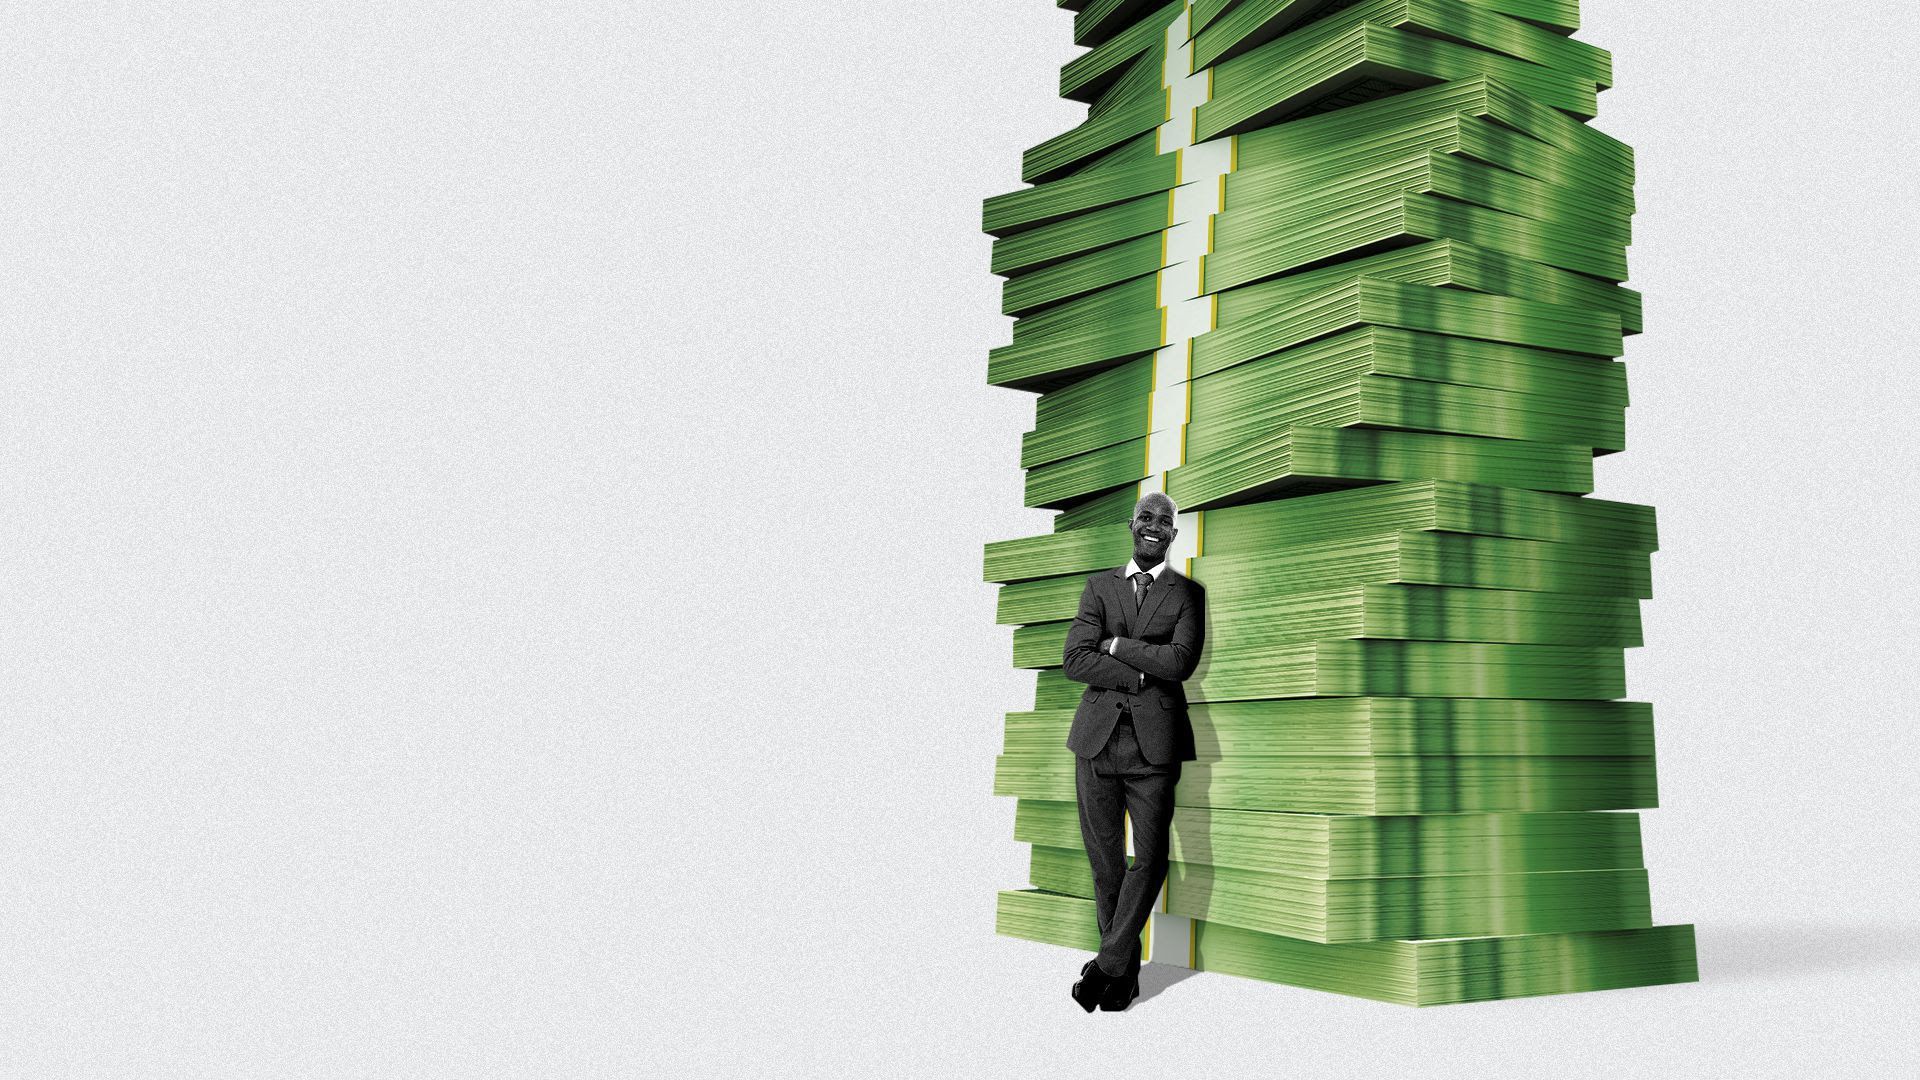 An illustration of a person with a large stack of money.